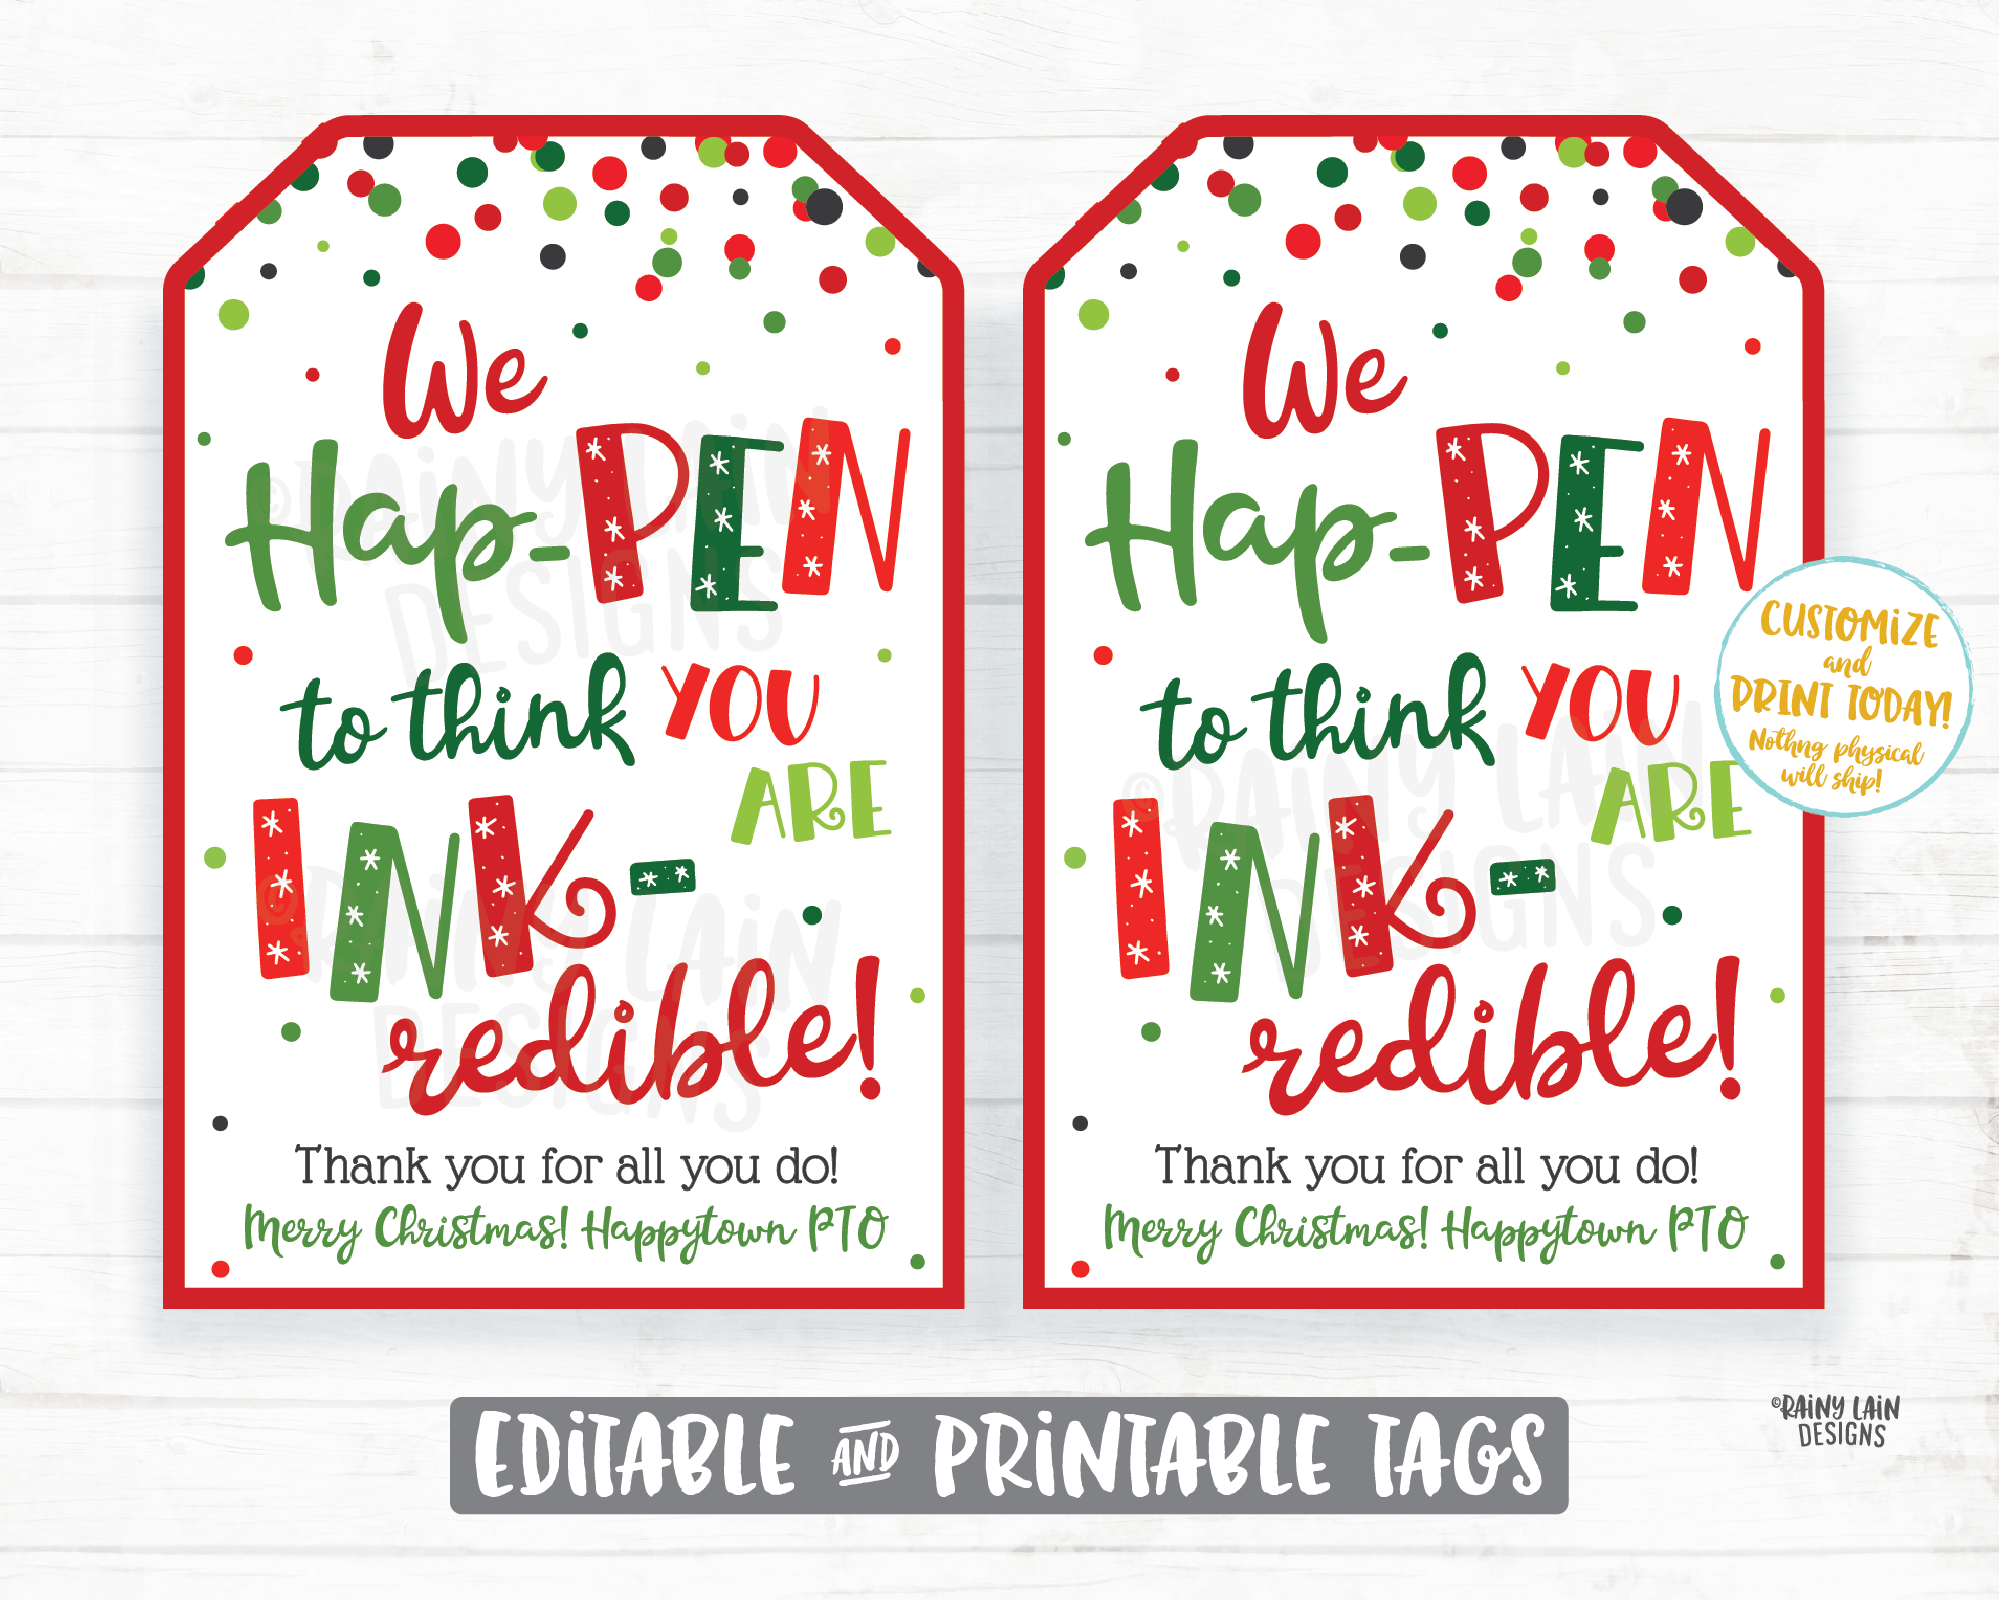 Ink Pen Gift Tags Hap-PEN INK-redible Printable Christmas Tags Editable Holiday Tags Christmas Co-Worker Staff Employee Teacher